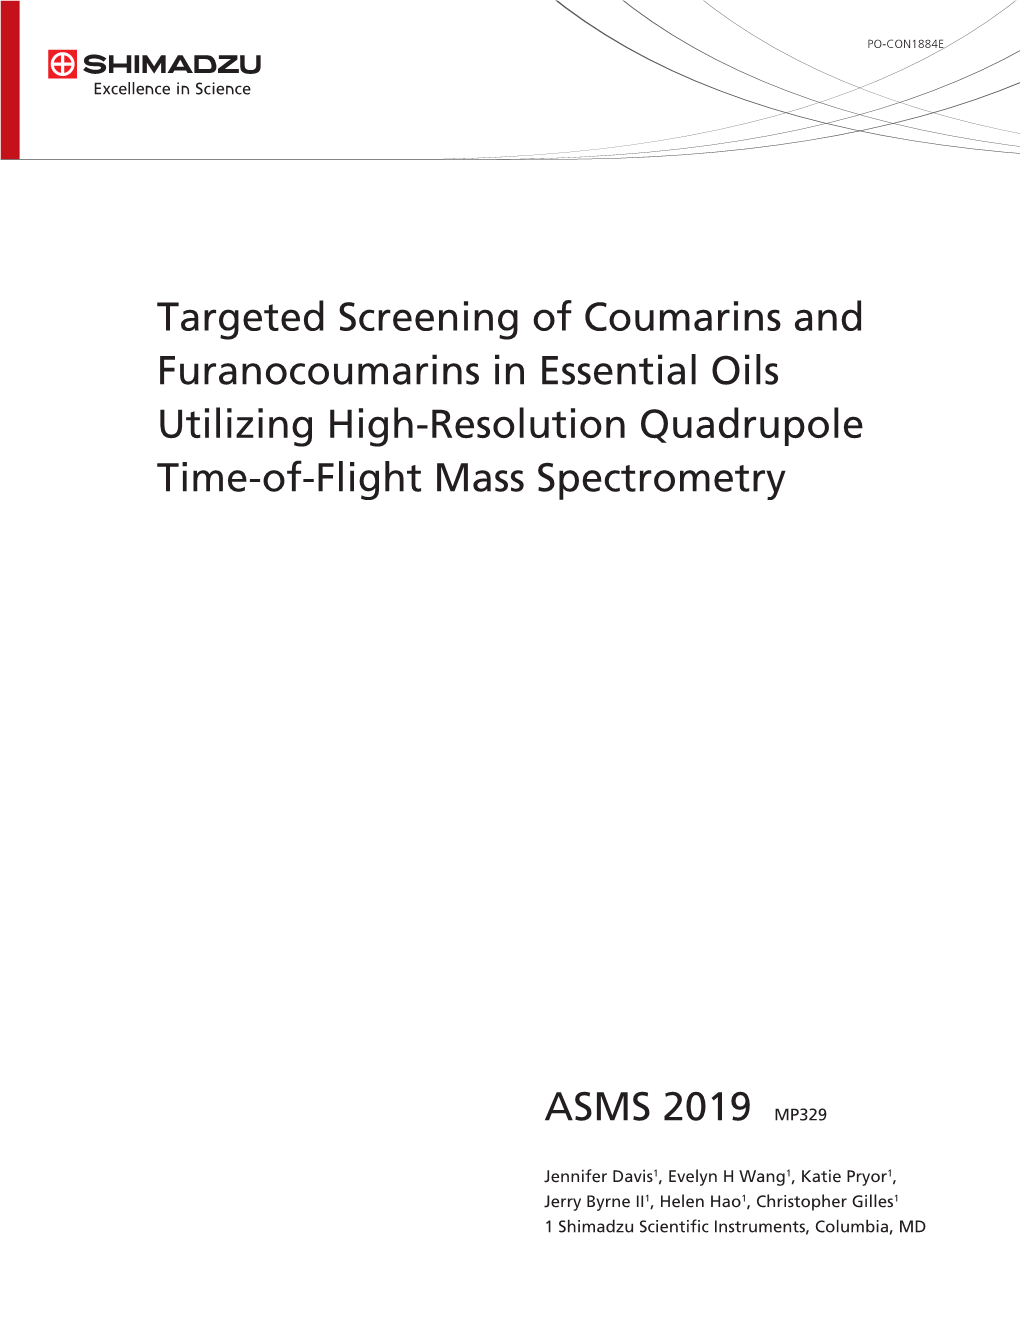 Targeted Screening of Coumarins and Furanocoumarins in Essential Oils Utilizing High-Resolution Quadrupole Time-Of-Flight Mass Spectrometry